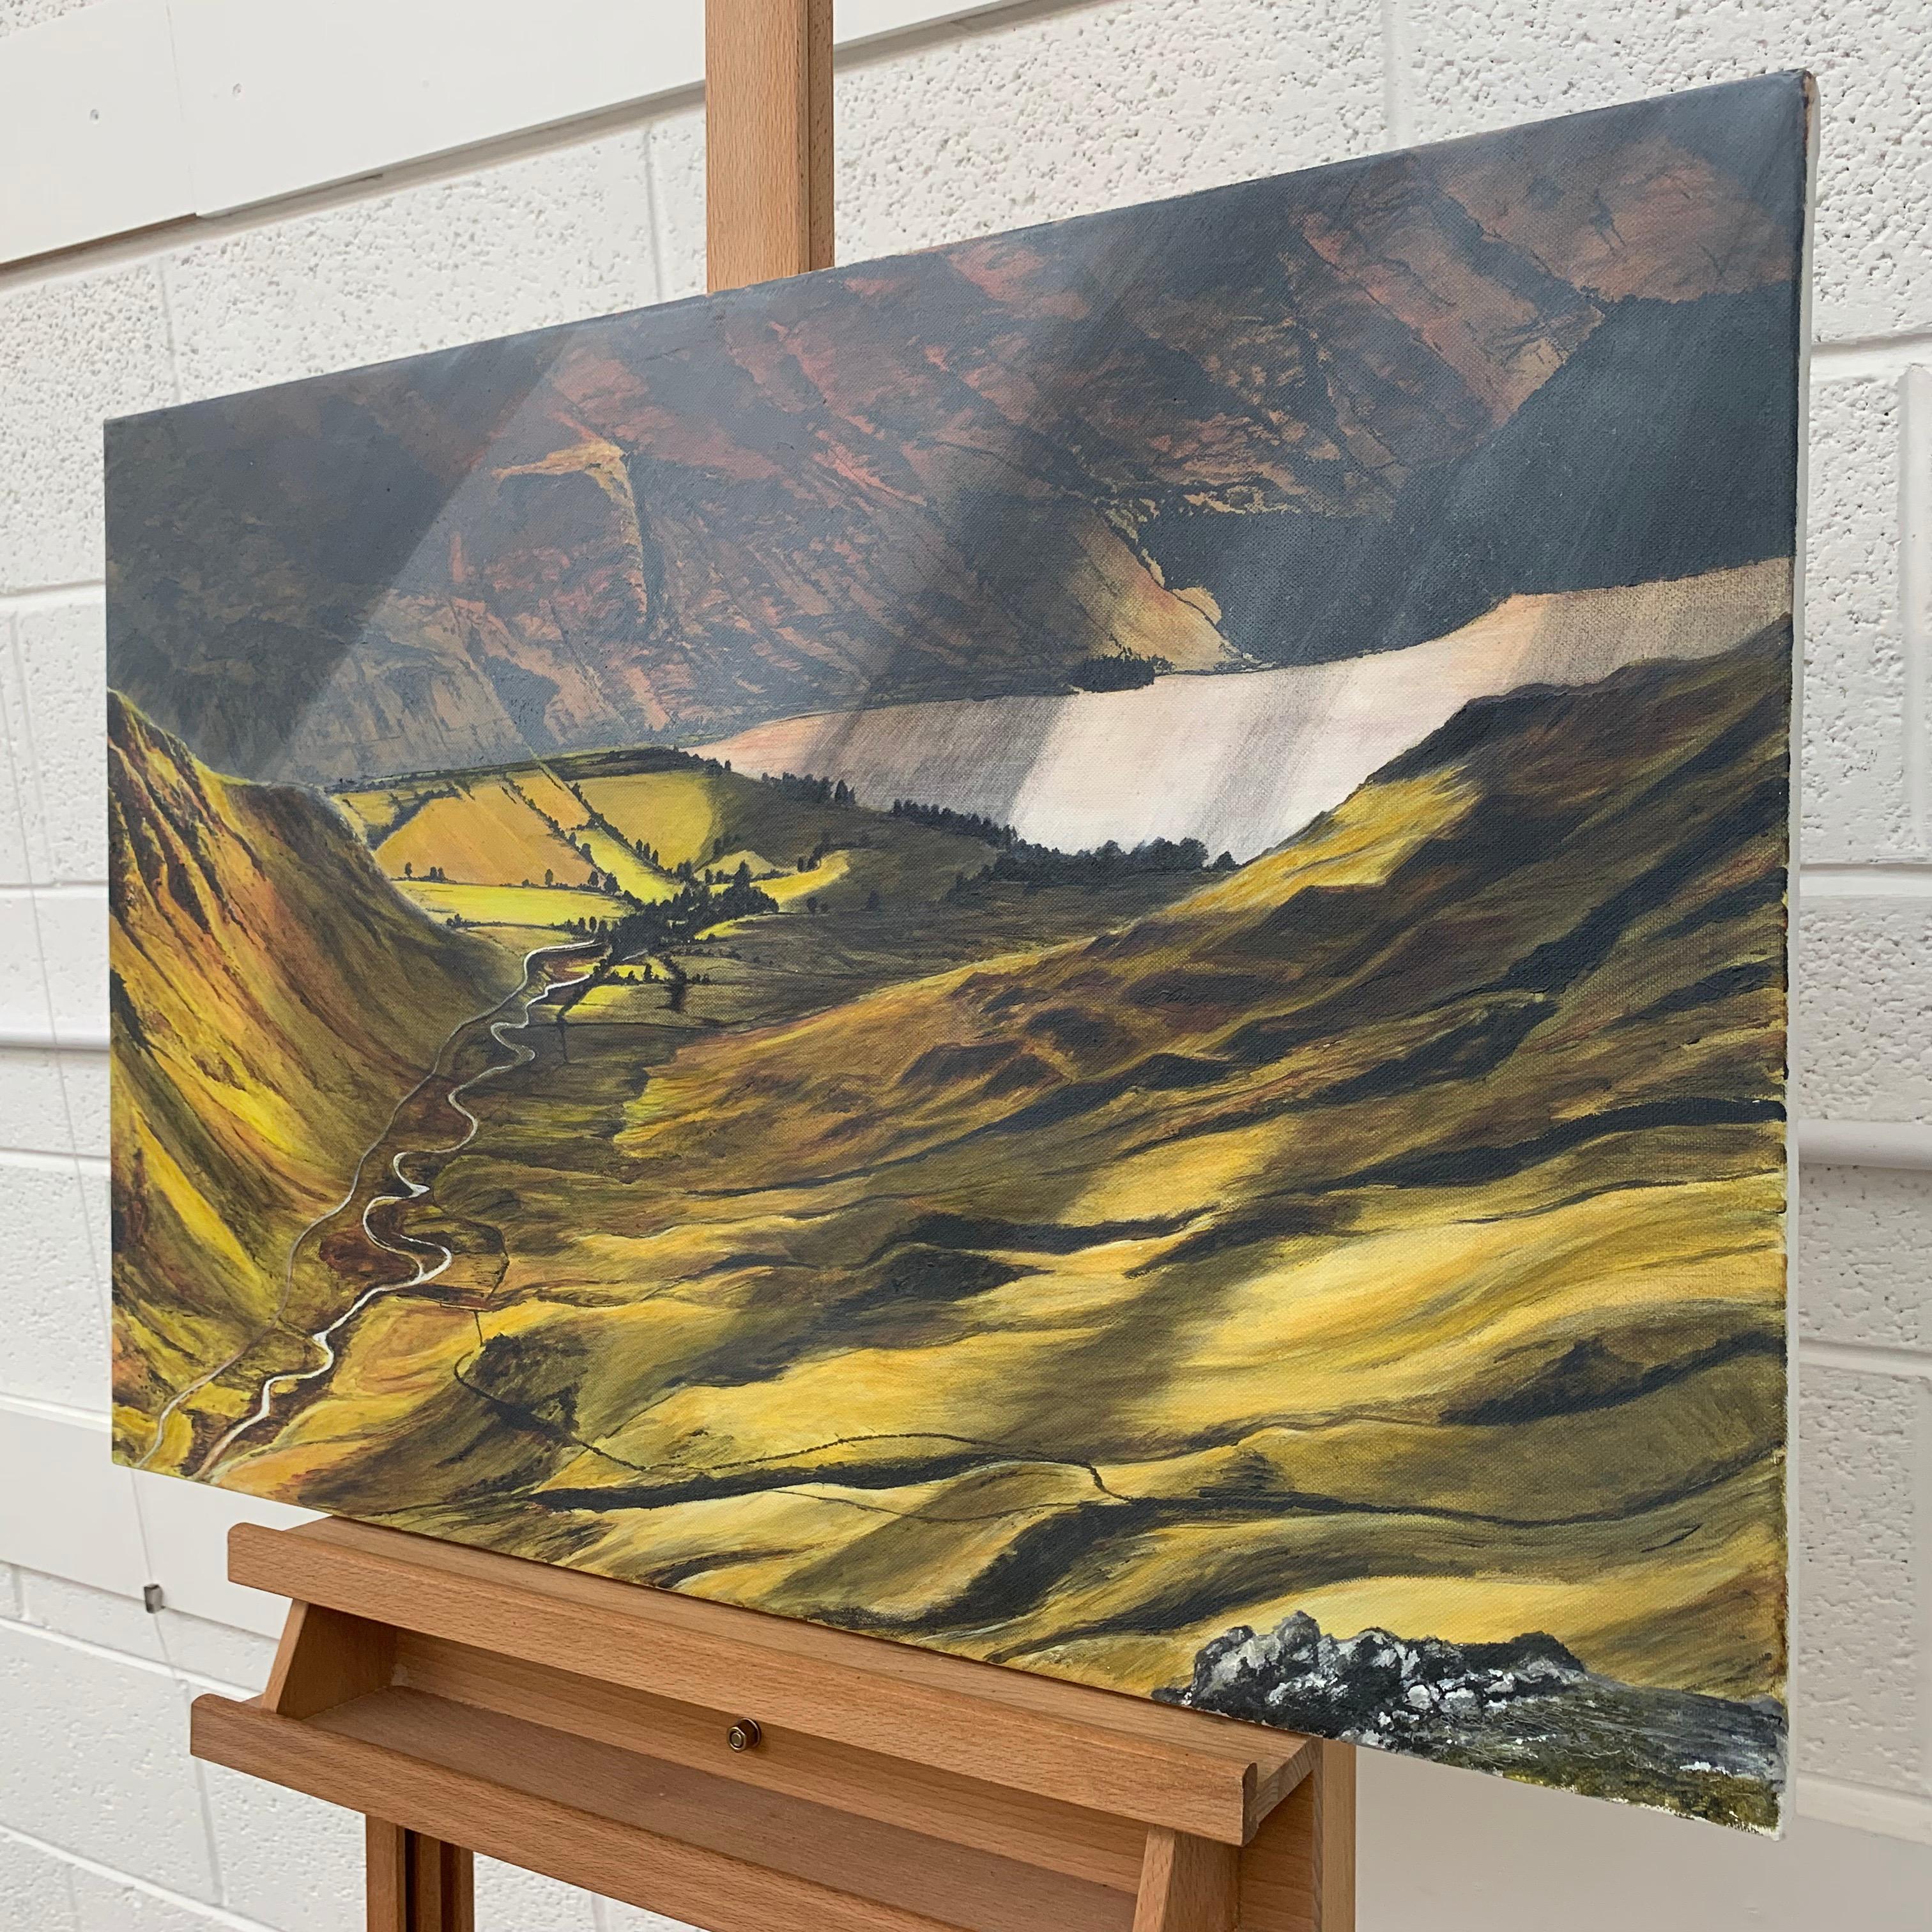 Landscape Painting of the English Lake District by British Contemporary Artist Rebecca Ann Wilmer. Born in Lancashire in 1979, Rebecca went through her school-life painting and drawing landscapes. Gaining a BA (Hons) in Surface Pattern, and an MA in